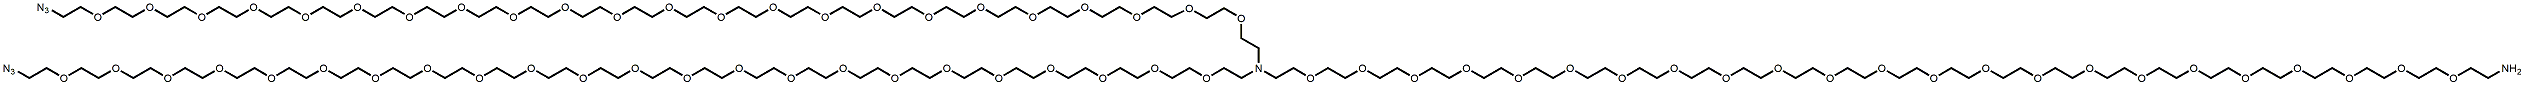 Molecular structure of the compound: N-(Amino-PEG23)-N-bis(PEG23-Azide)